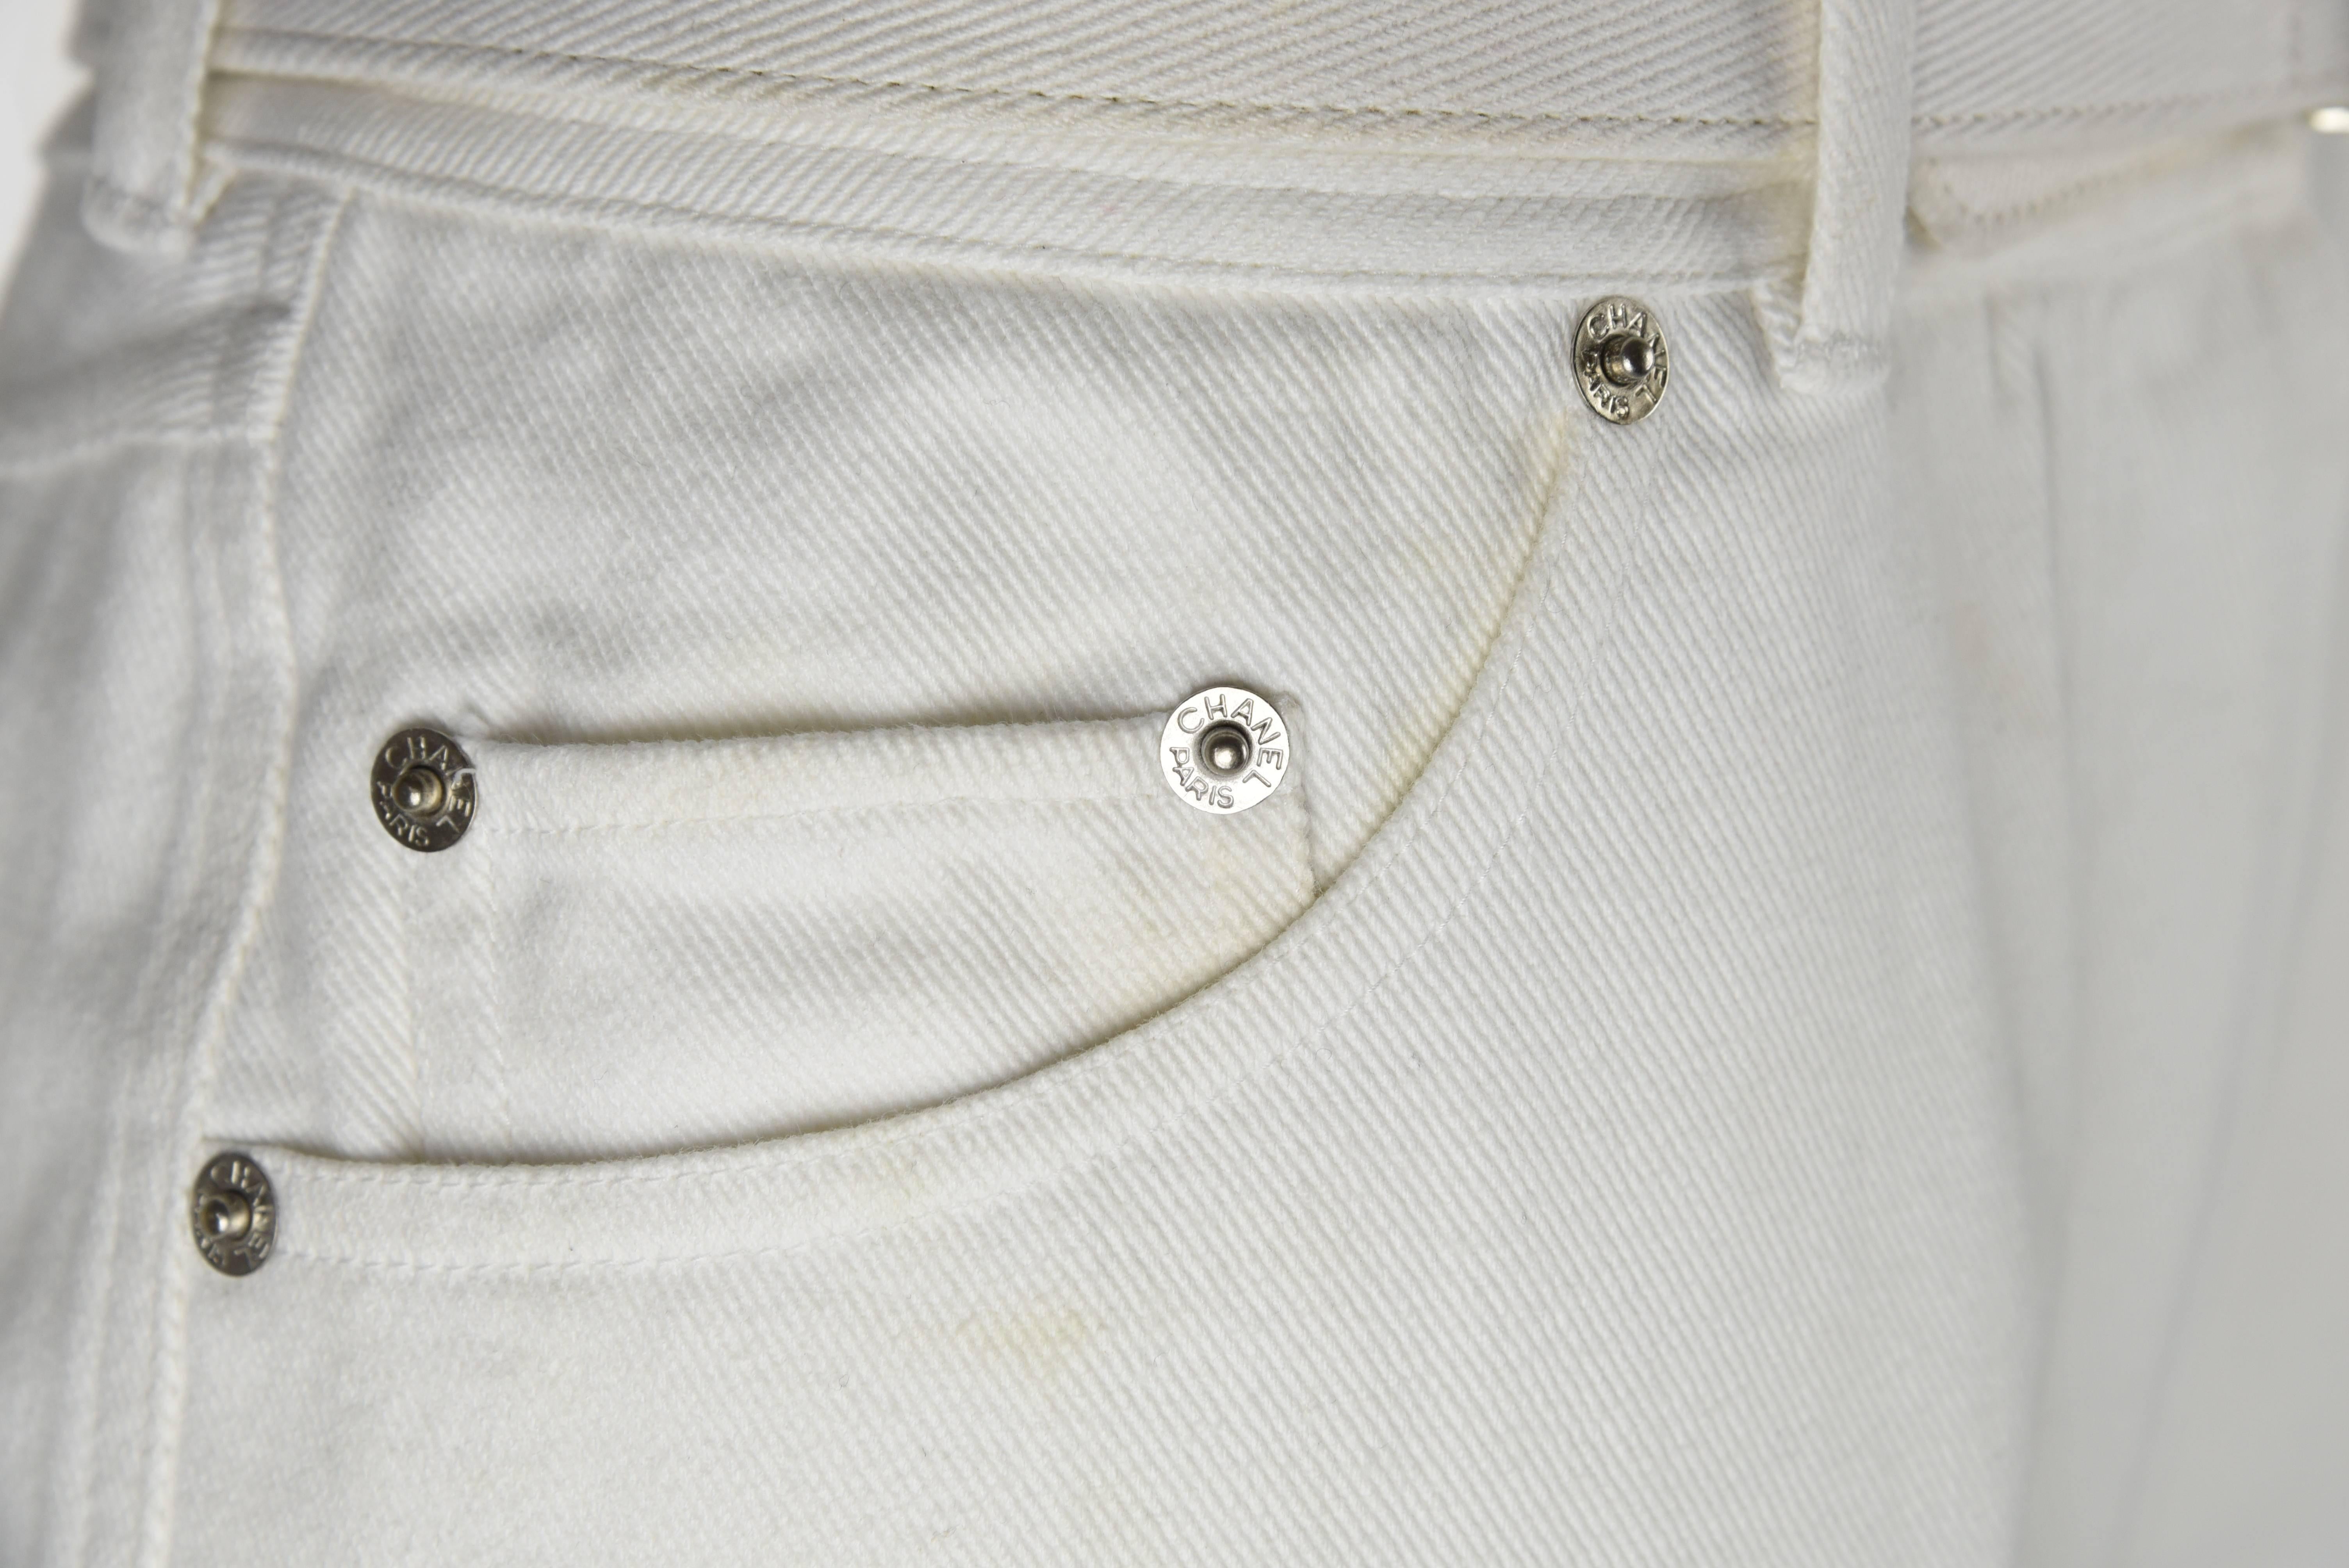 Women's Chanel 1995P White Twill Cotton Jeans with Silver Belt Buckle & CC Pocket FR38 For Sale